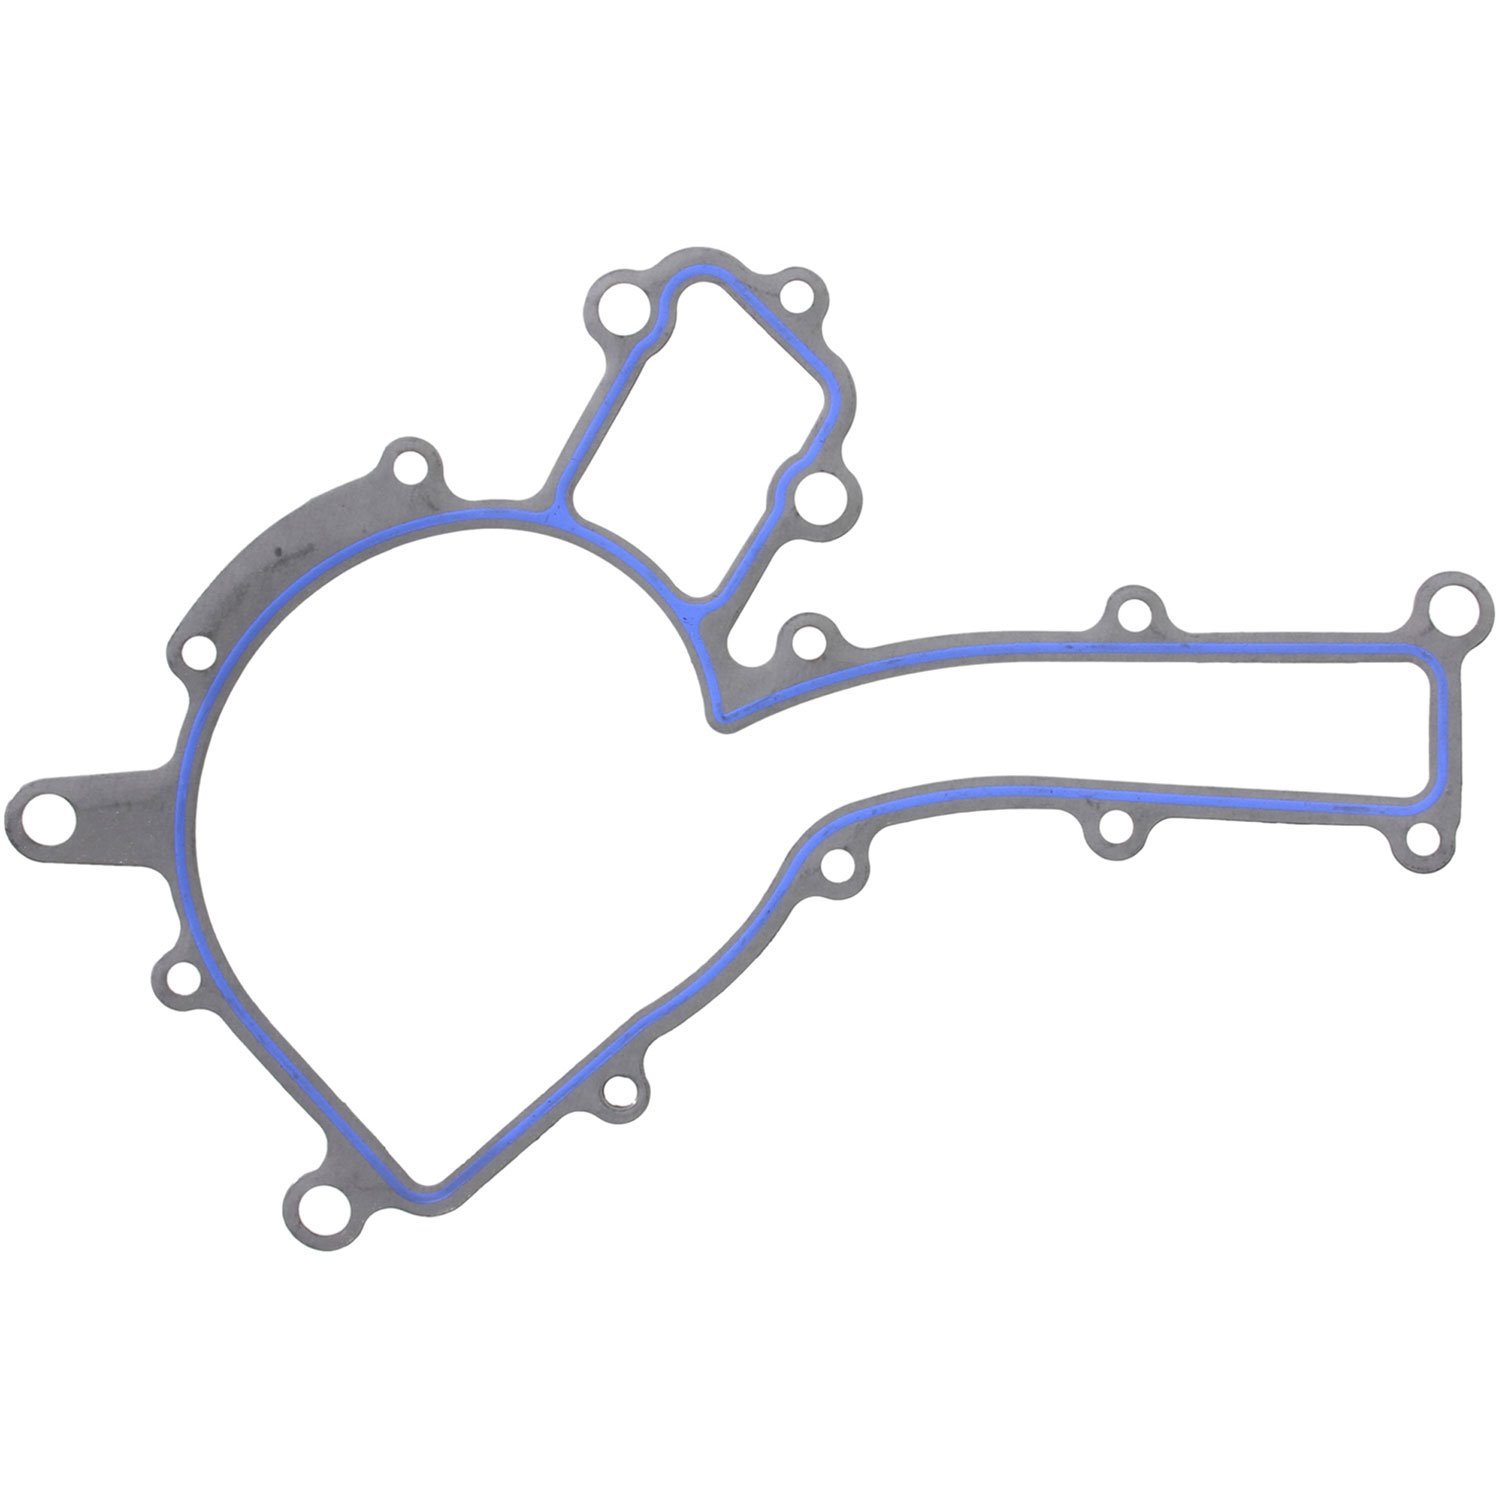 WATER PUMP GASKET 2008-1998 CHRY/MB V6 3.2L Water Pump